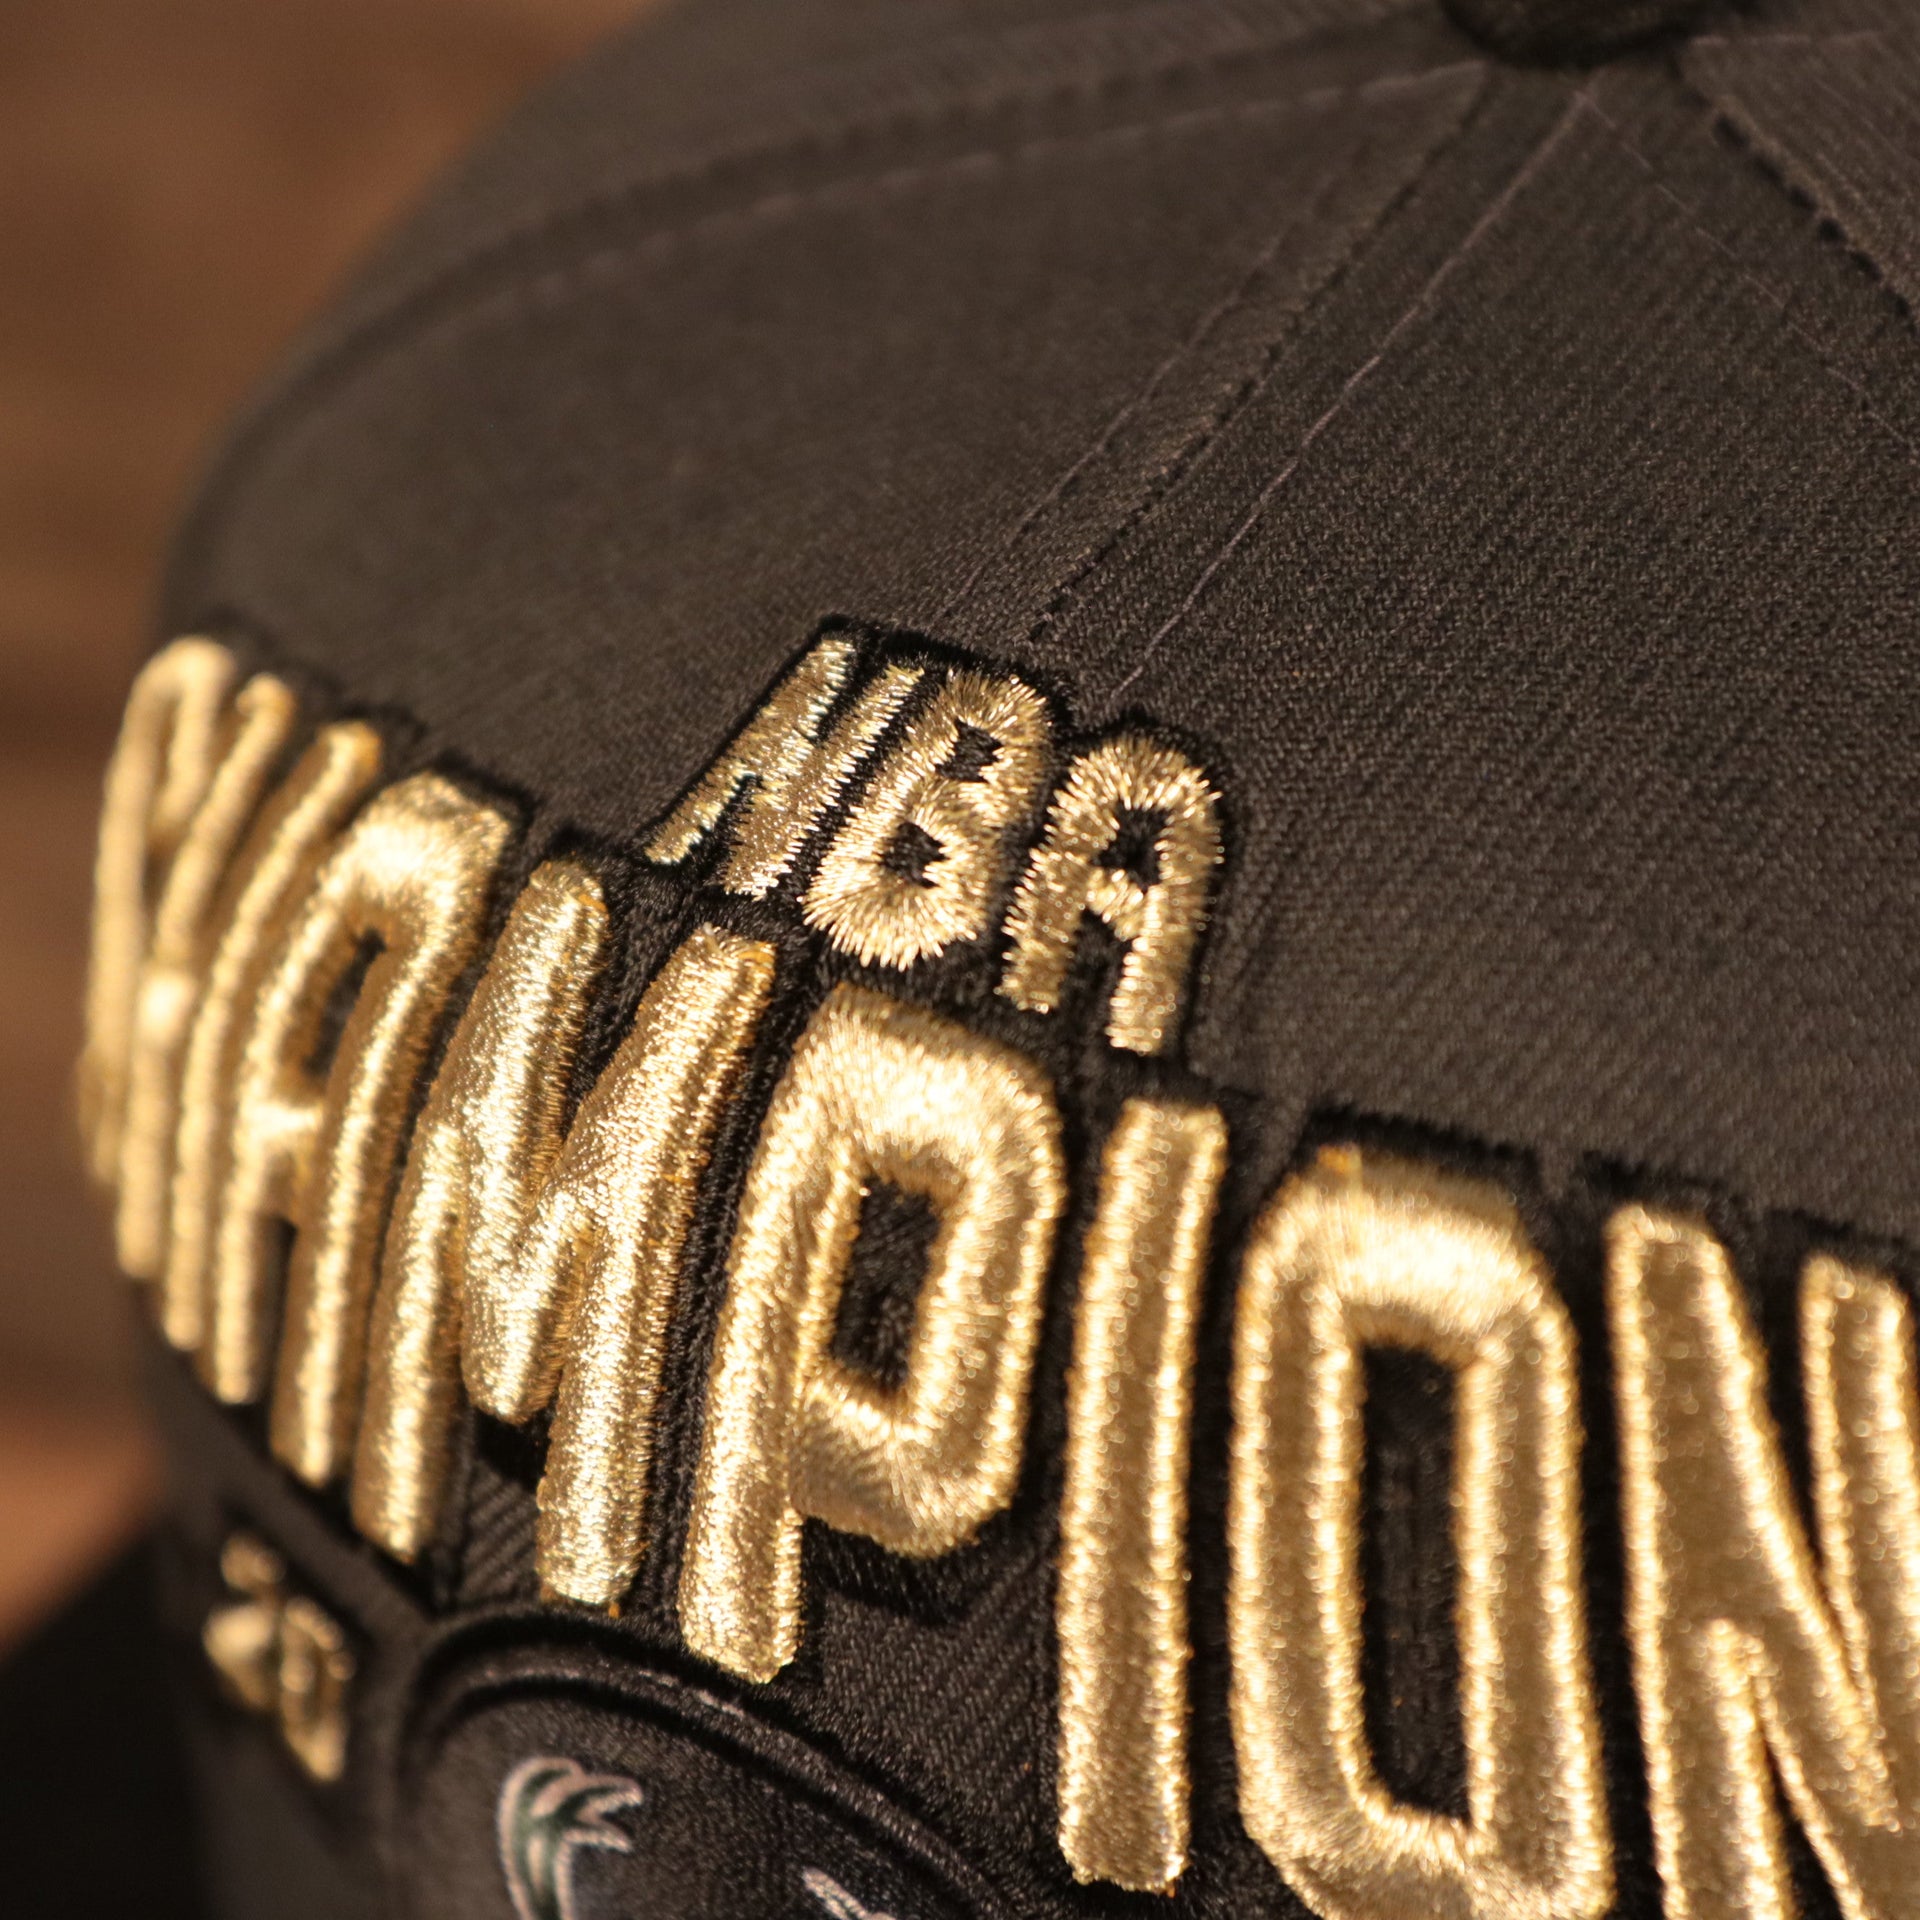 A close up of the NBA Champions embroidered in metallic gold on the front of the Milwaukee Bucks 2021 NBA Champions snapback hat